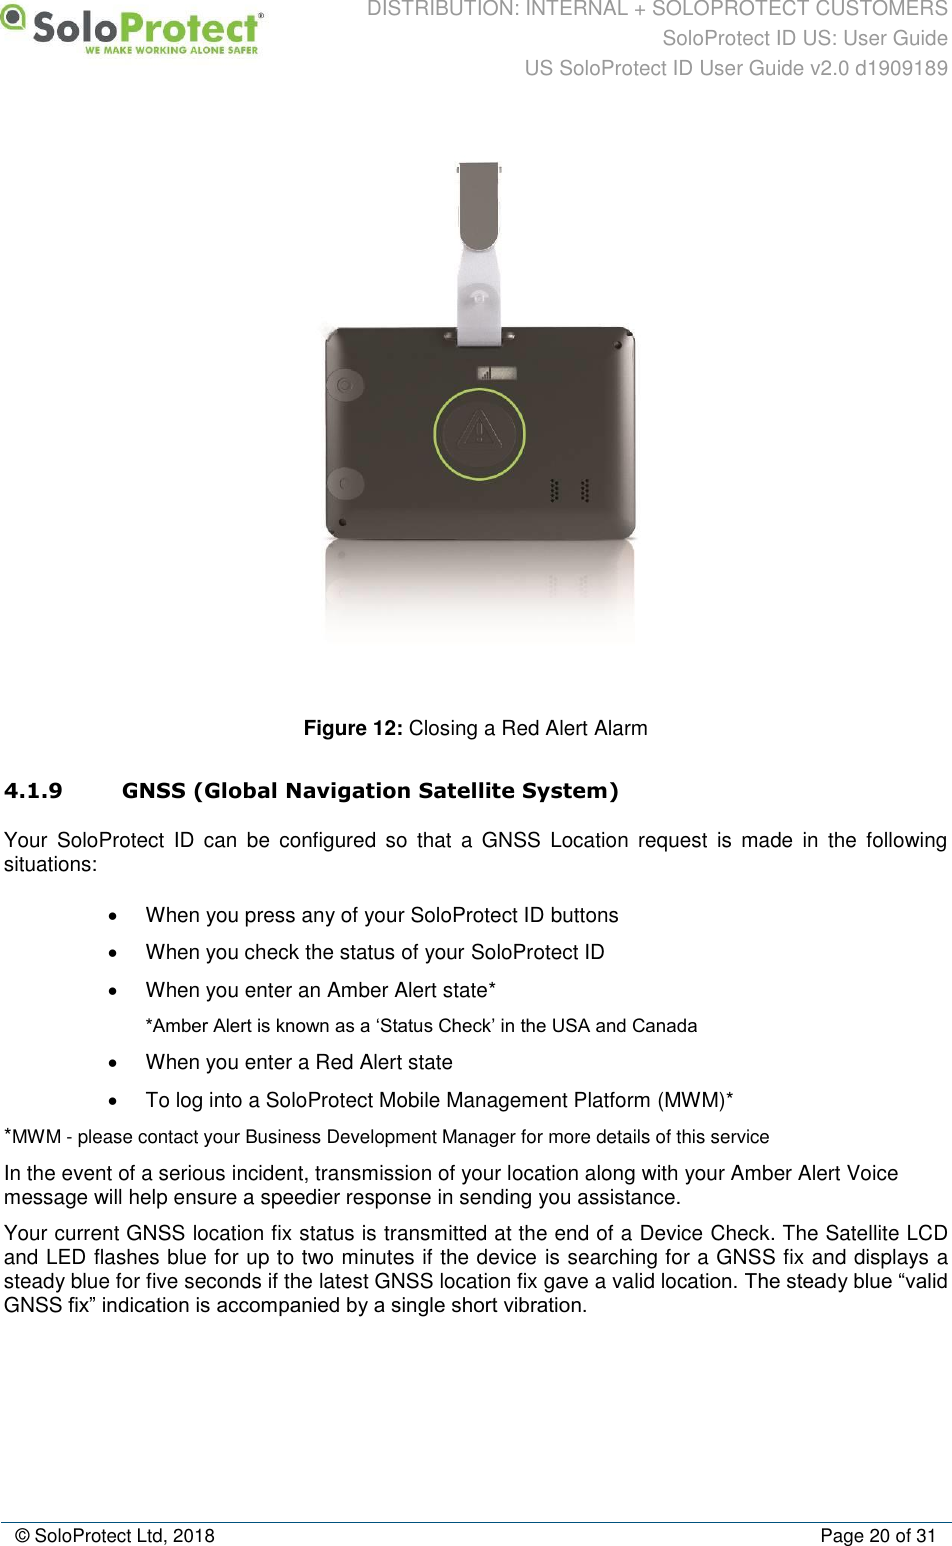 DISTRIBUTION: INTERNAL + SOLOPROTECT CUSTOMERS SoloProtect ID US: User Guide US SoloProtect ID User Guide v2.0 d1909189  © SoloProtect Ltd, 2018  Page 20 of 31  Figure 12: Closing a Red Alert Alarm 4.1.9 GNSS (Global Navigation Satellite System) Your  SoloProtect  ID  can  be  configured  so  that  a  GNSS  Location  request  is  made  in  the  following situations: •  When you press any of your SoloProtect ID buttons •  When you check the status of your SoloProtect ID •  When you enter an Amber Alert state* *Amber Alert is known as a ‘Status Check’ in the USA and Canada •  When you enter a Red Alert state •  To log into a SoloProtect Mobile Management Platform (MWM)* *MWM - please contact your Business Development Manager for more details of this service In the event of a serious incident, transmission of your location along with your Amber Alert Voice message will help ensure a speedier response in sending you assistance. Your current GNSS location fix status is transmitted at the end of a Device Check. The Satellite LCD and LED flashes blue for up to two minutes if the device is searching for a GNSS fix and displays a steady blue for five seconds if the latest GNSS location fix gave a valid location. The steady blue “valid GNSS fix” indication is accompanied by a single short vibration. 